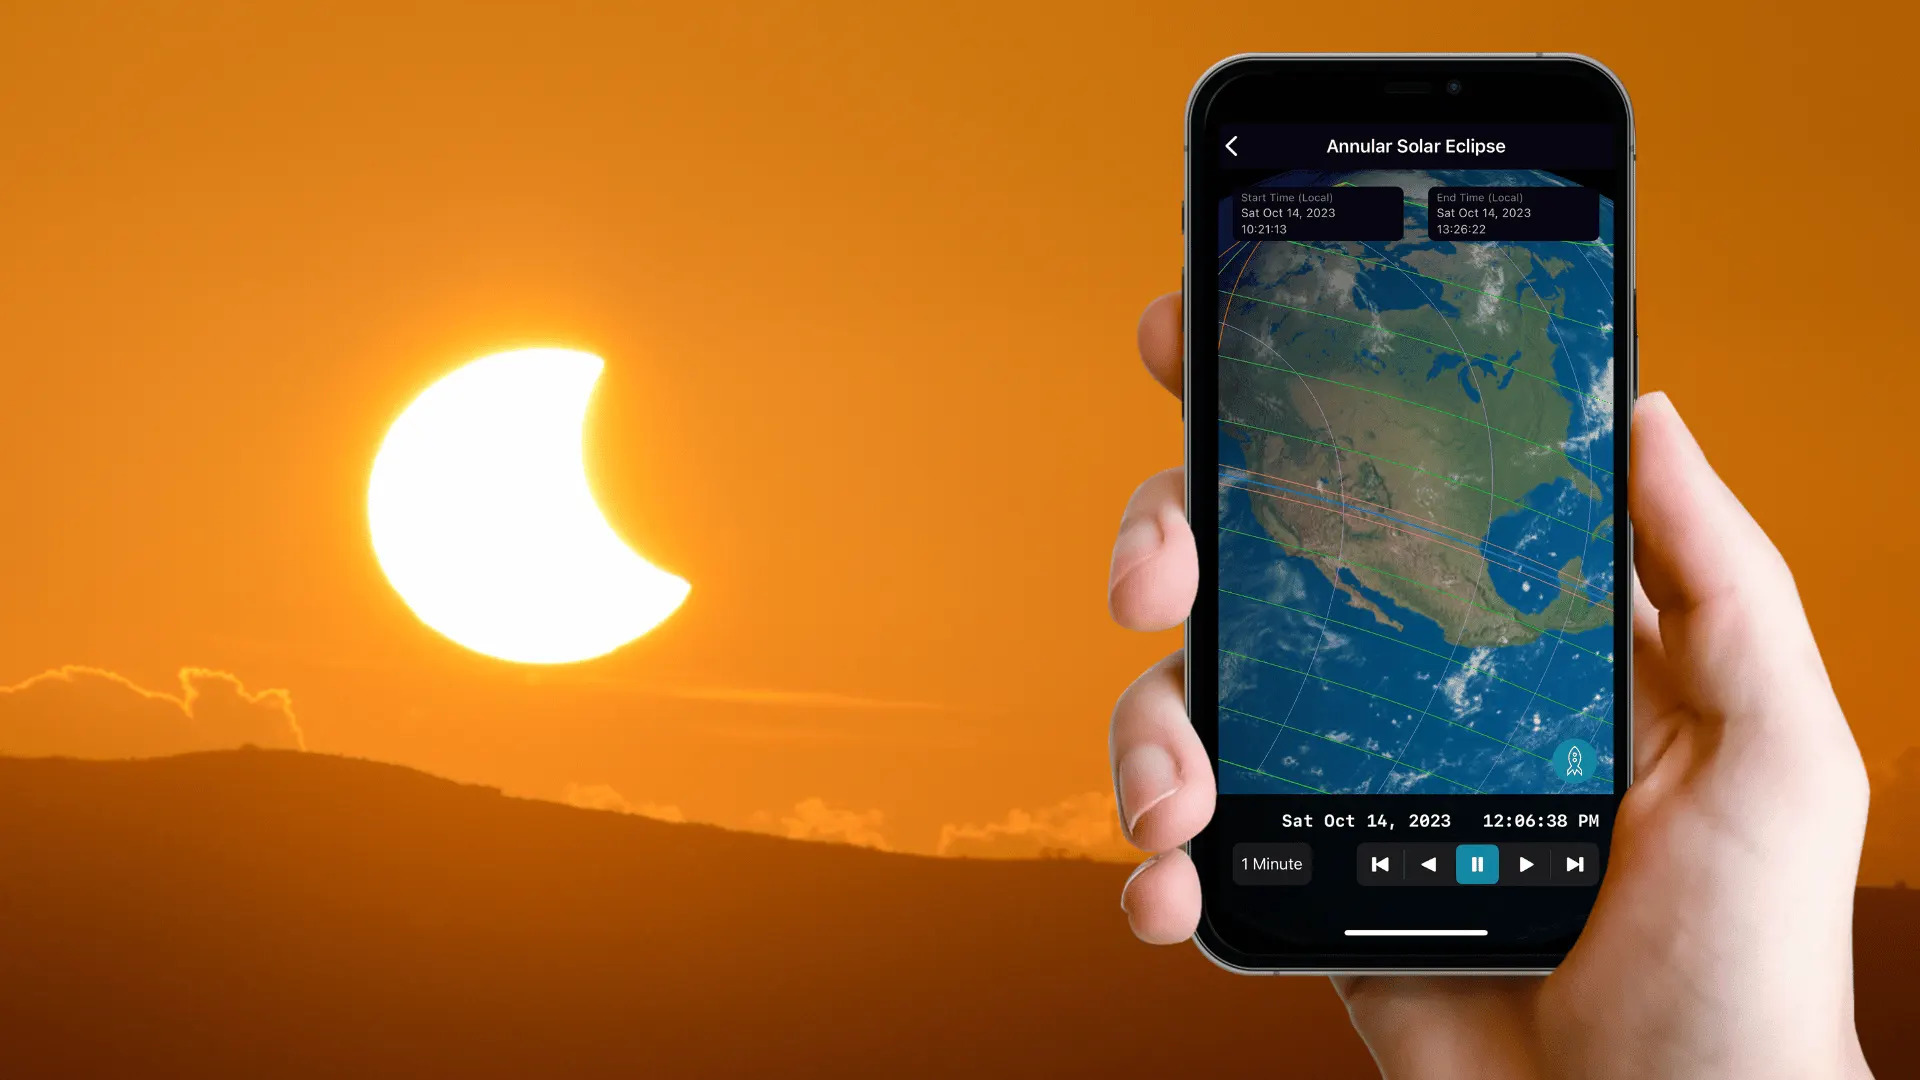 Hold the annular solar eclipse in your hand with new ‘One Eclipse’ app from Astronomers Without Borders